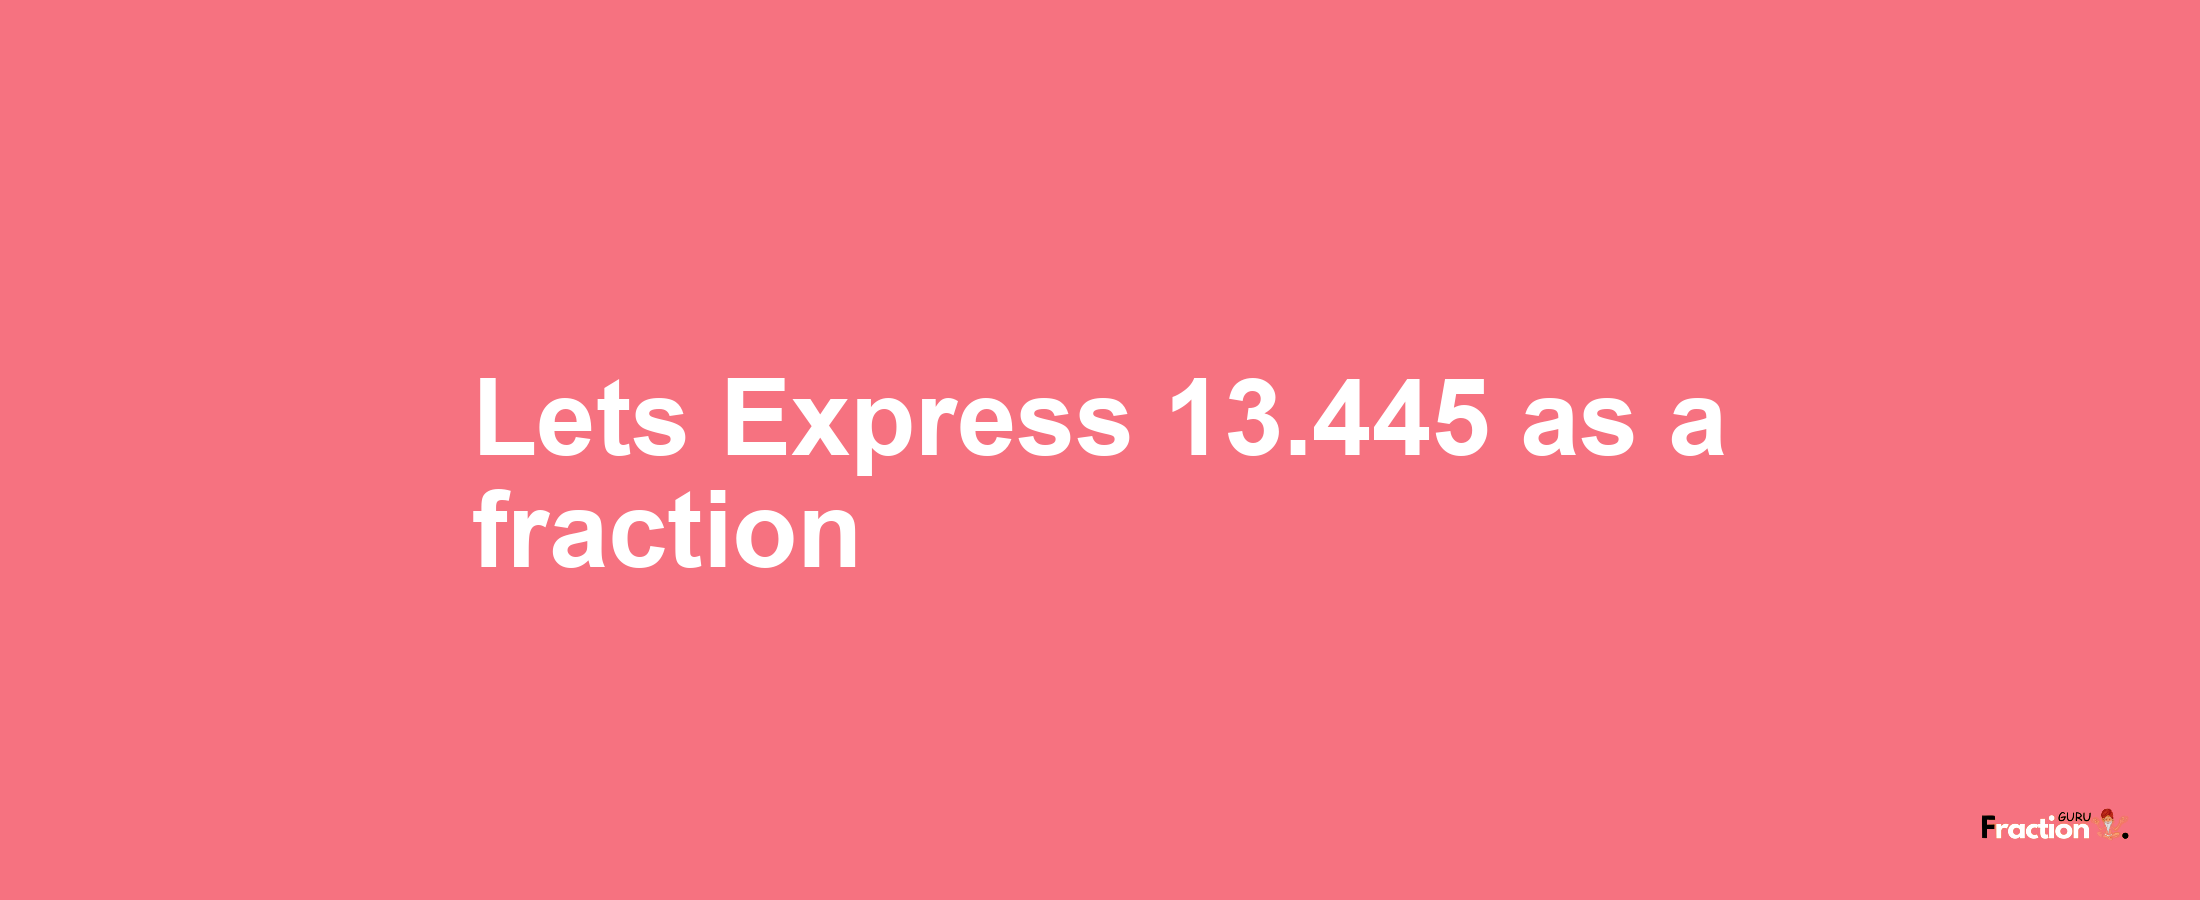 Lets Express 13.445 as afraction